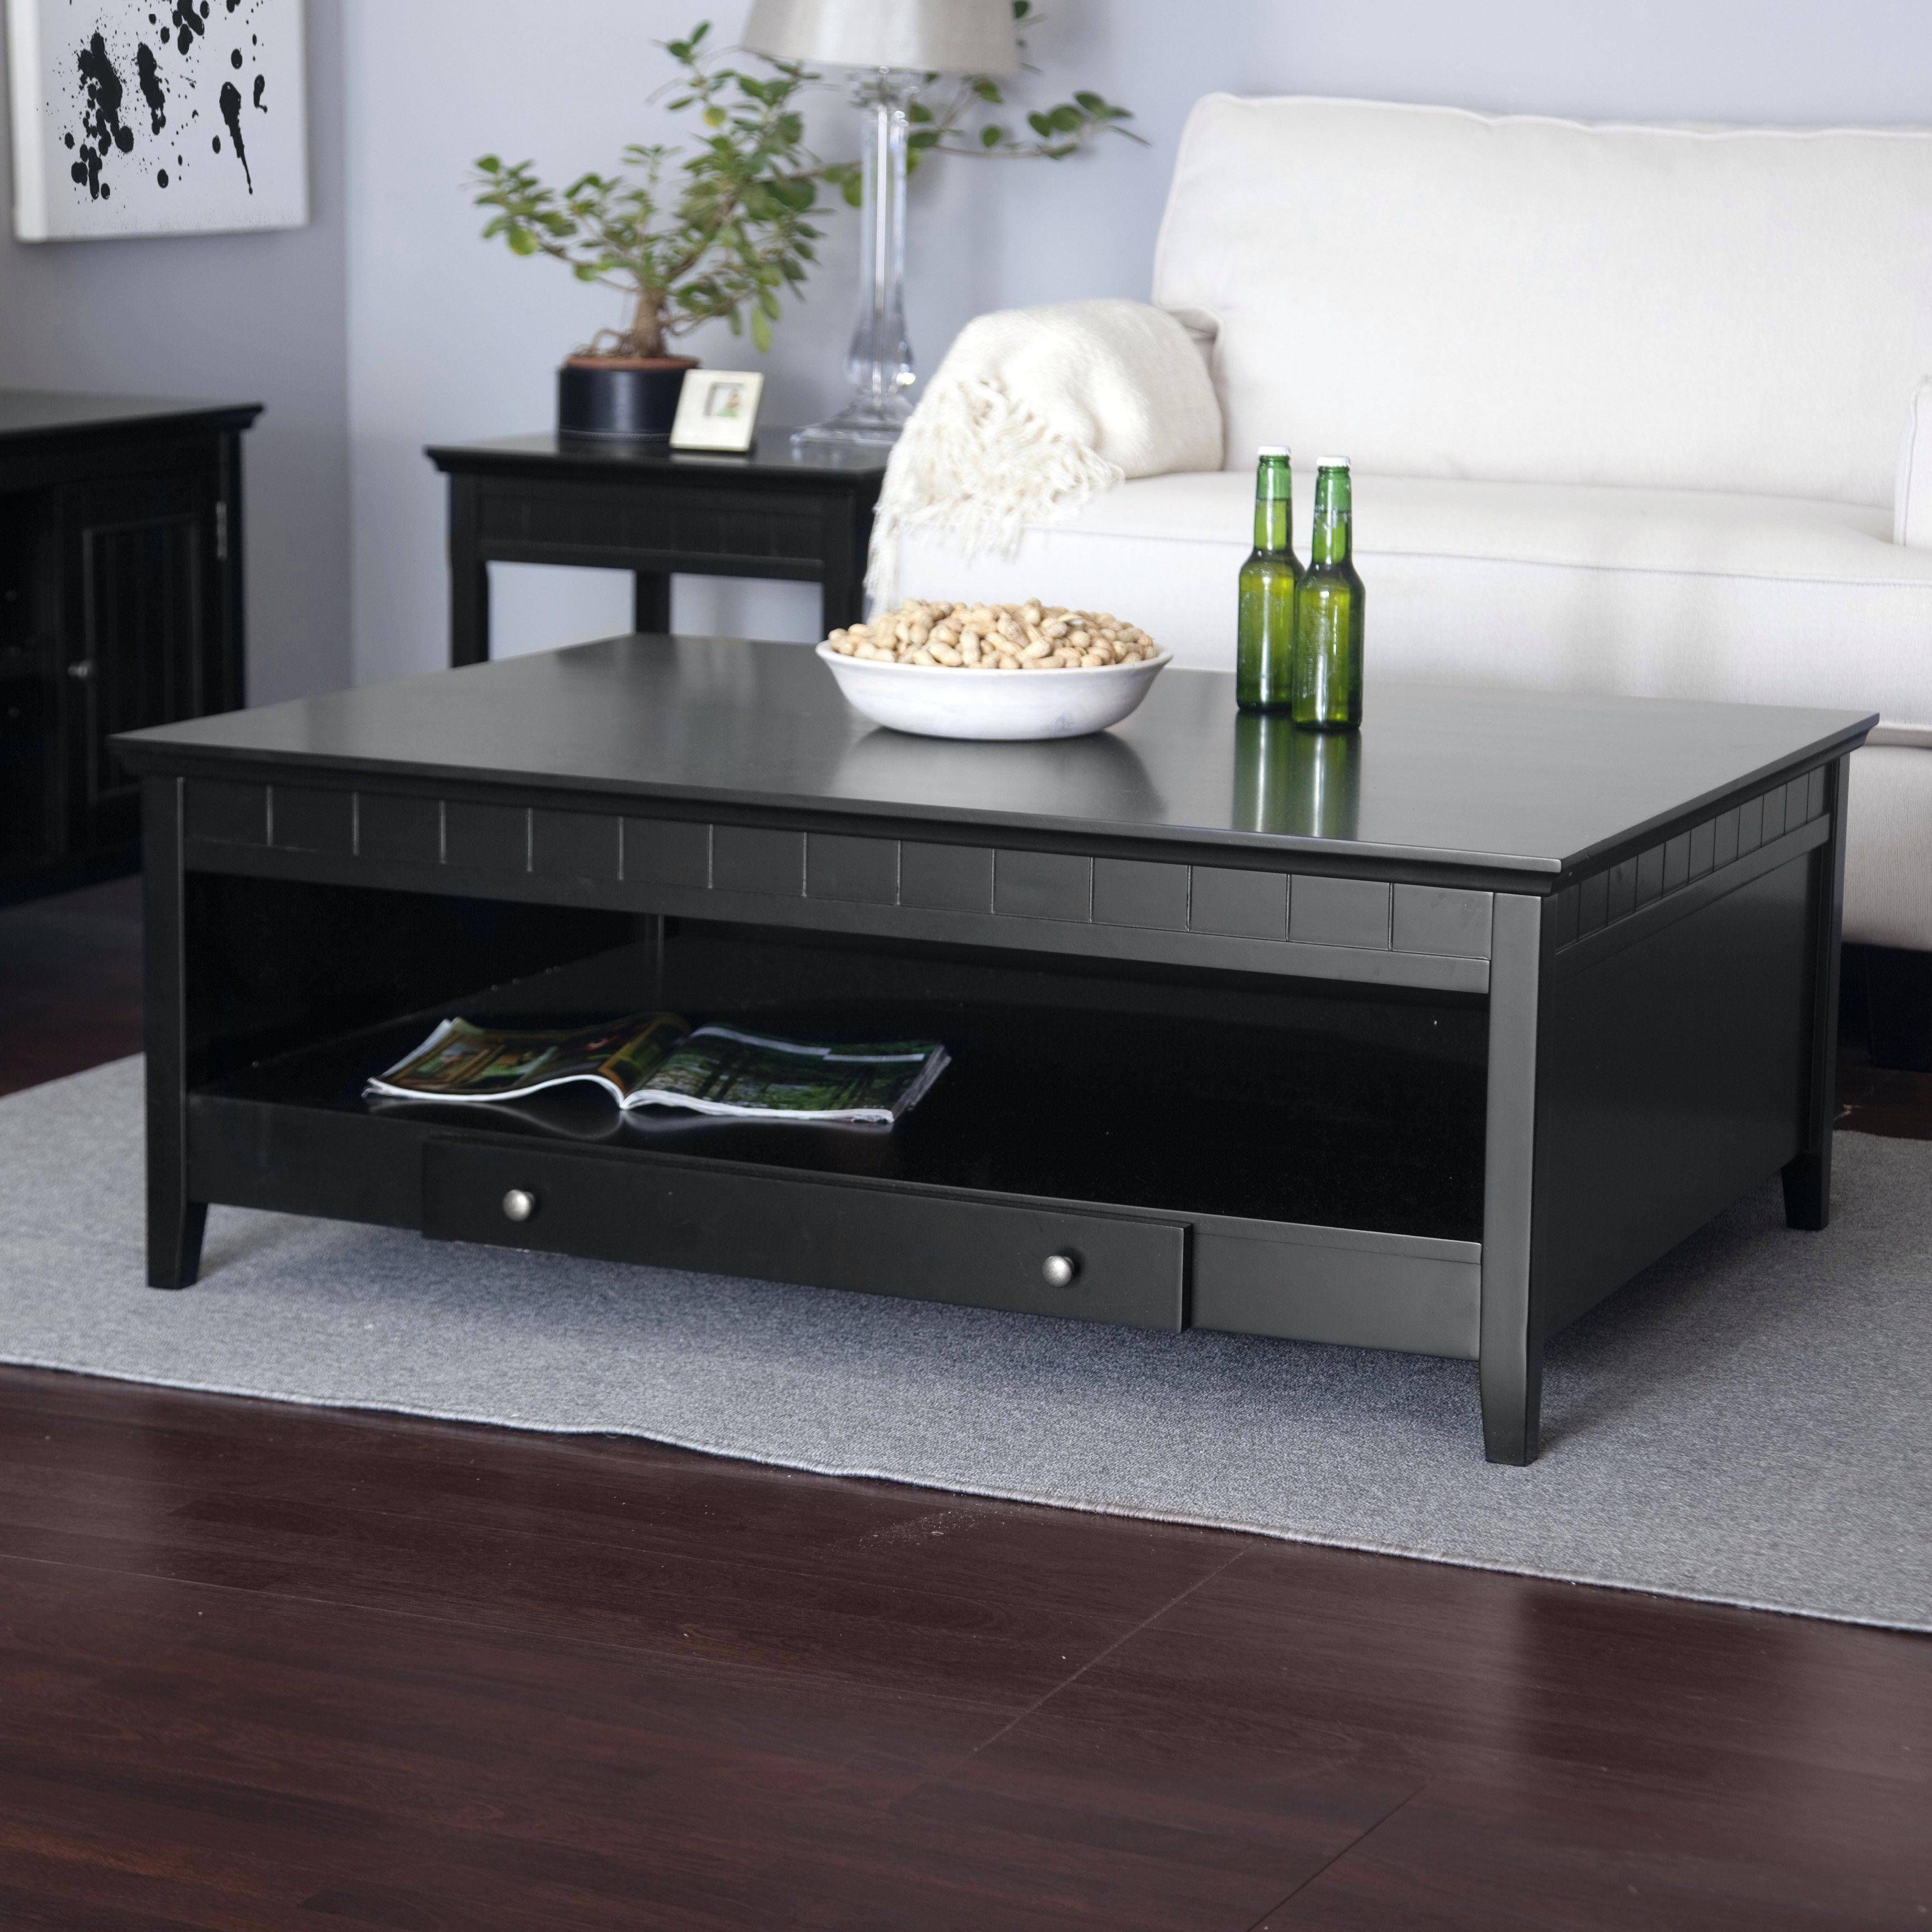 Coffee Table: Square Coffee Table Storage Large Round Coffee For Square Coffee Table Storages (View 13 of 30)